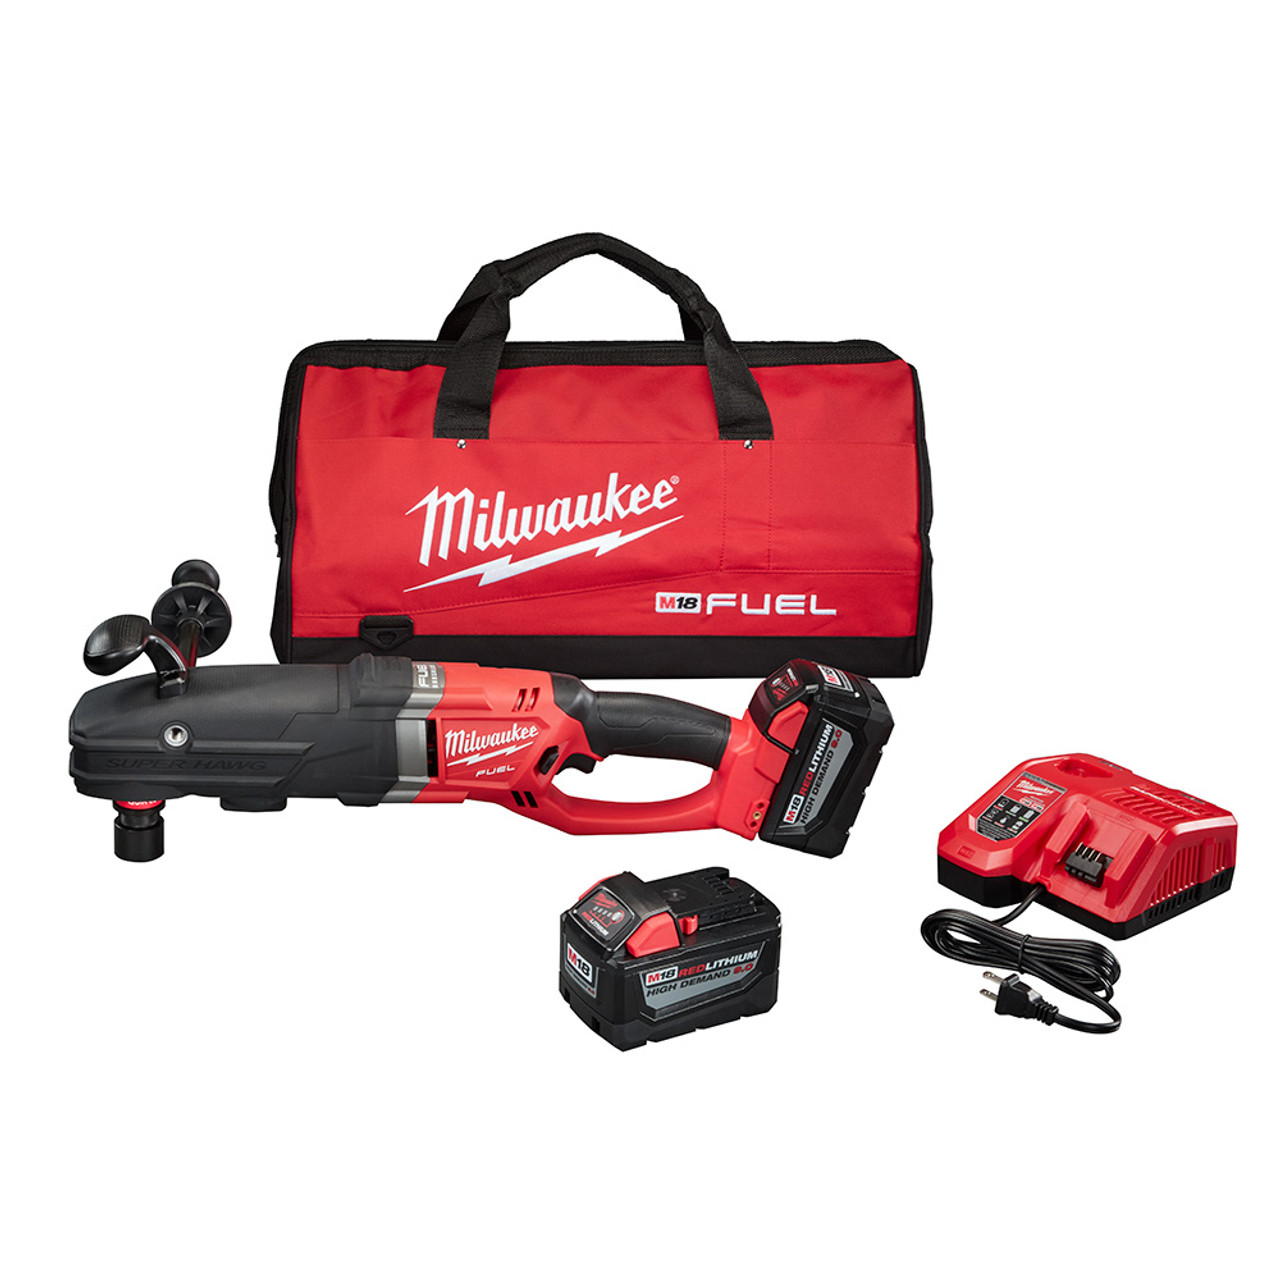 Milwaukee 2711-22 M18 Fuel Super Hawg Right Angle Drill Kit